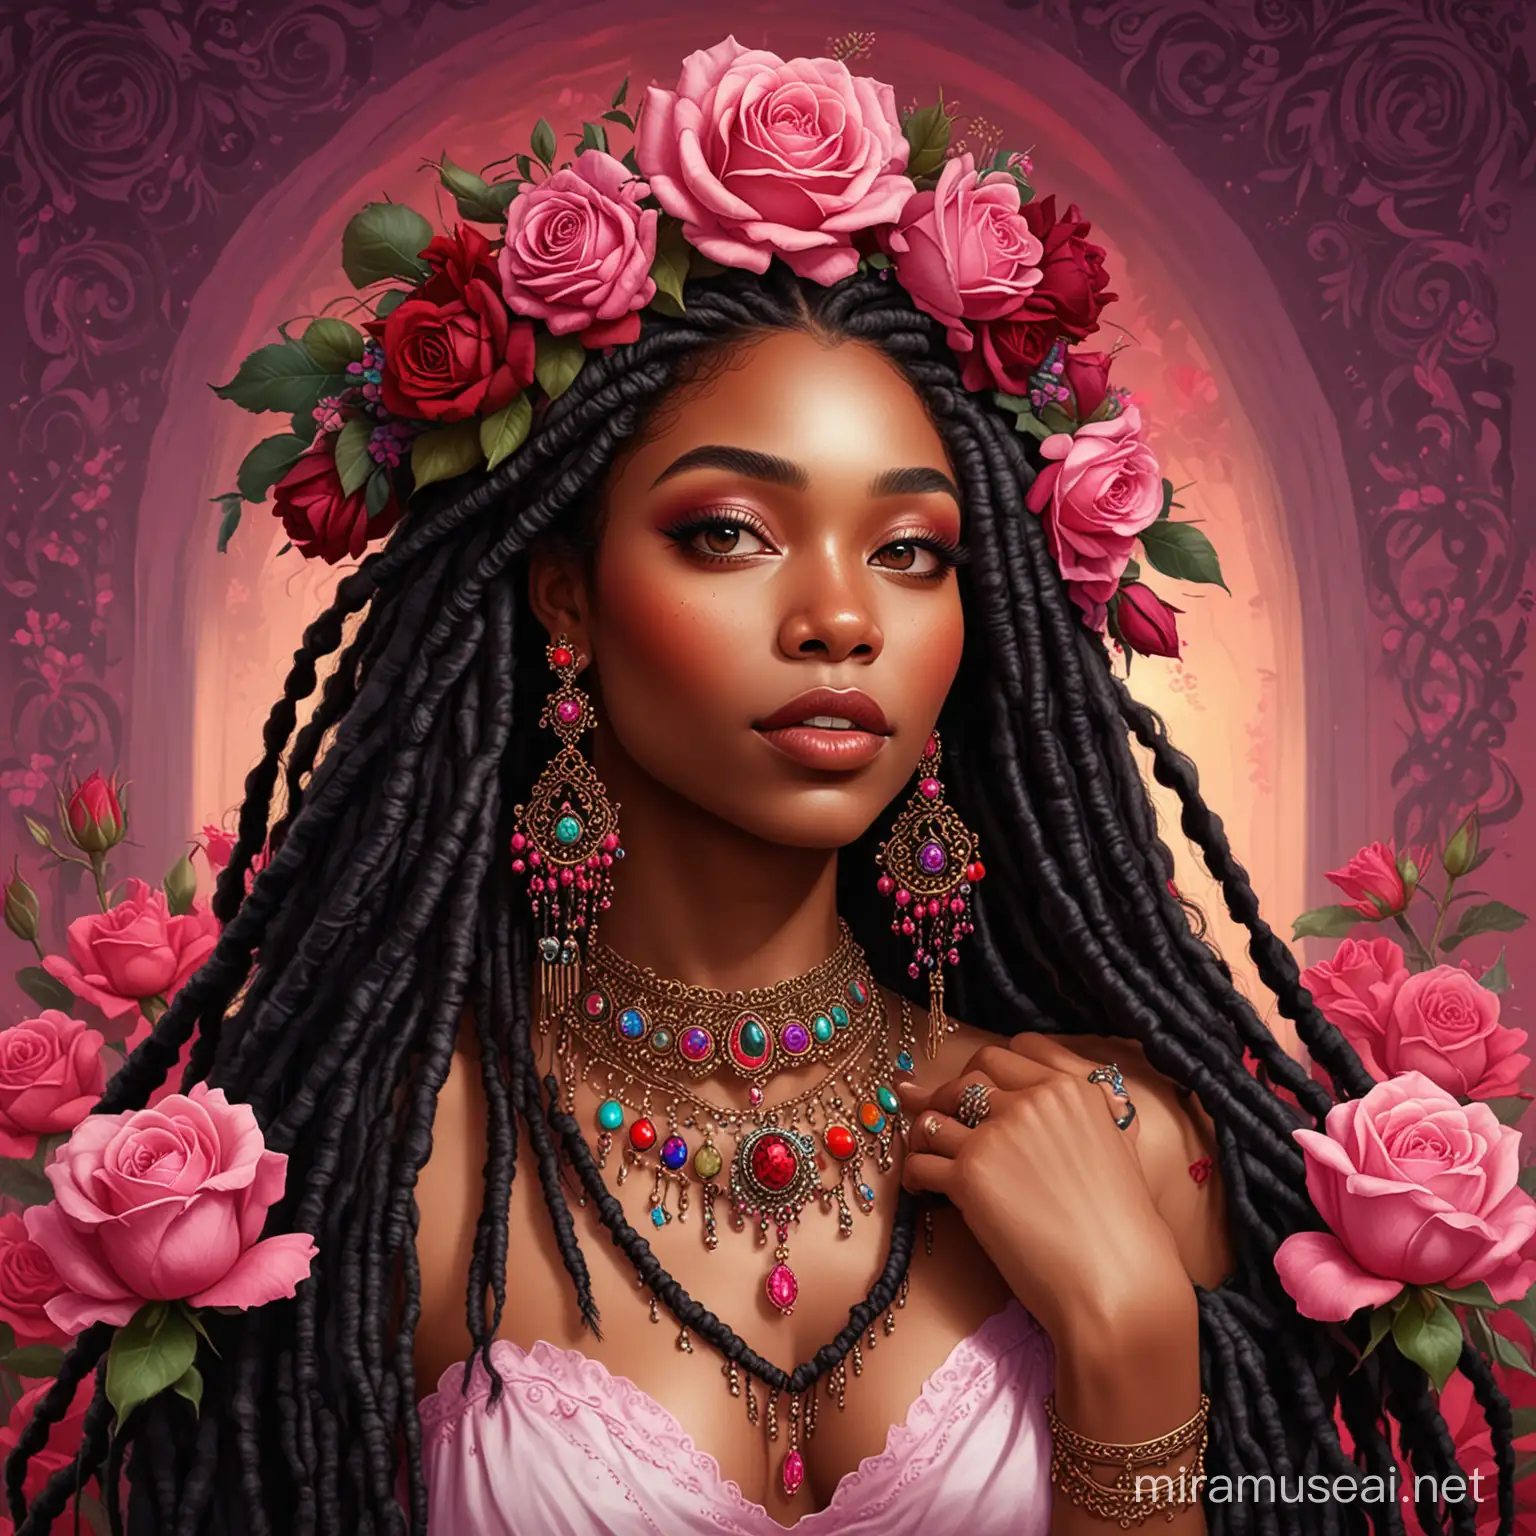 digital painting cartoon portrait of a beautiful black woman with long black dreadlocks with burgundy ends she has ornate jewelry and big earrings, the background is a vibrant pink with colorful flowers, her hands are under her chin, in front of her there's a red rose 
